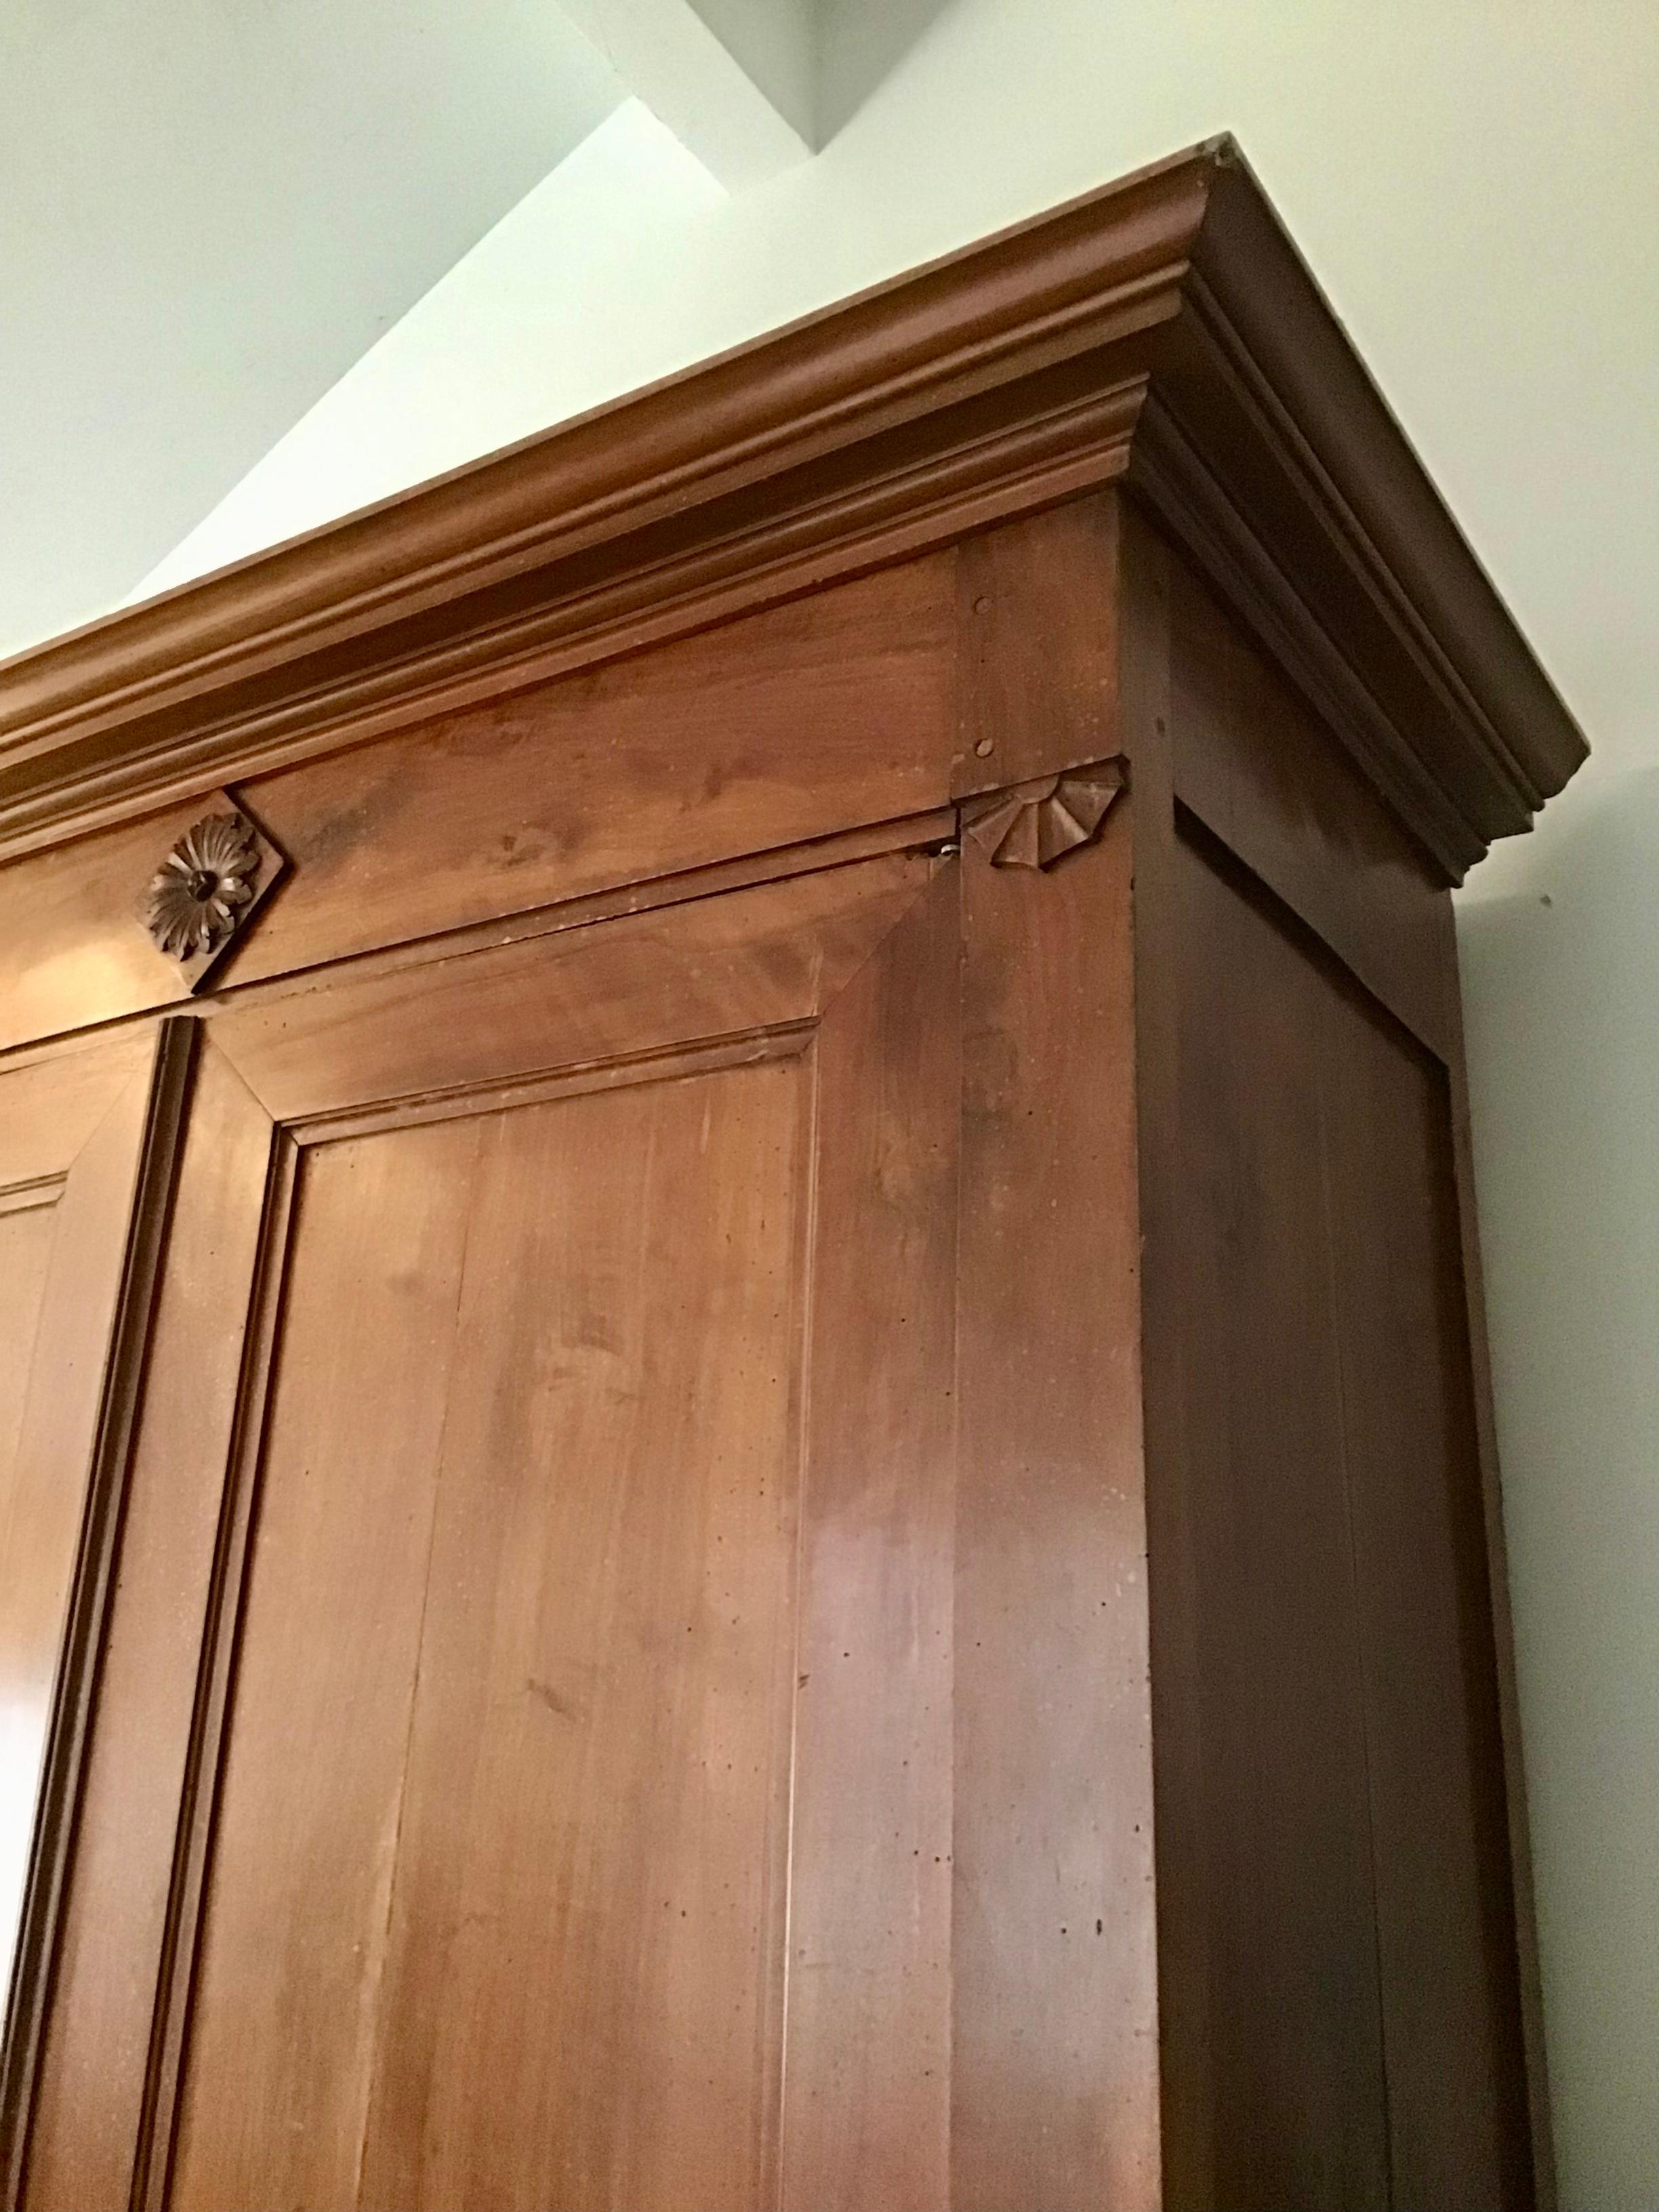 French Armoire in original condition from the 1700s. It is shy of 9 feet tall. It is roomy enough inside for two shelves and hanging clothing, or for a large TV, or even as a toddlers bed.